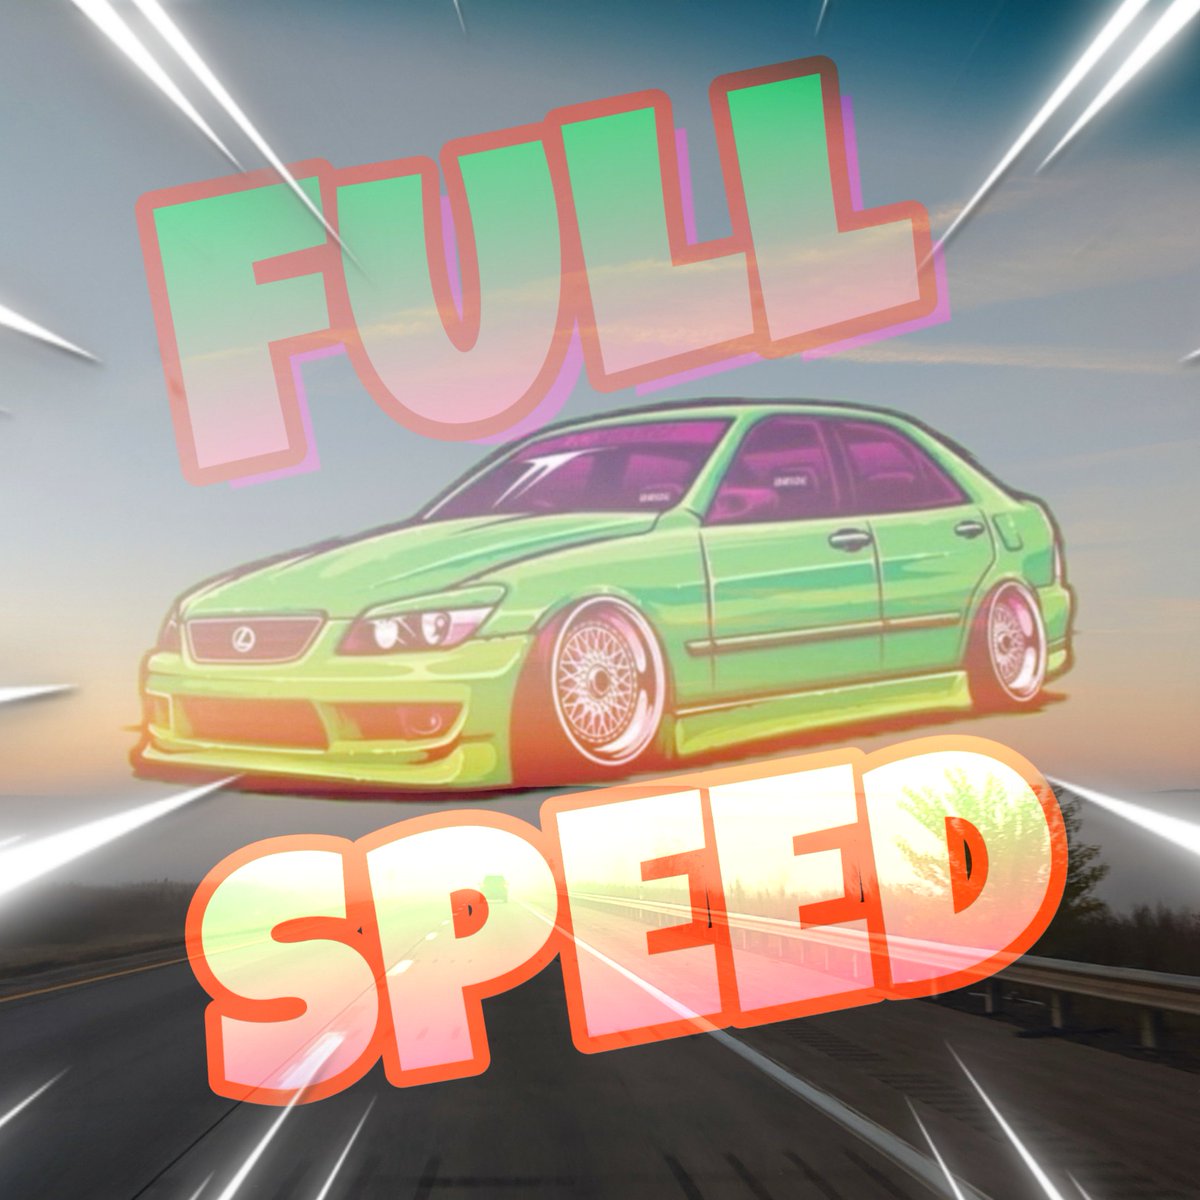 Cryptstar On Twitter Im Making A New Racing Game Robloxdev Gamedev Roblox Robloxgfx Shoutout To Polygate1 For Making This Game Icon Https T Co Yn5vncuuzl - roblox new racing game